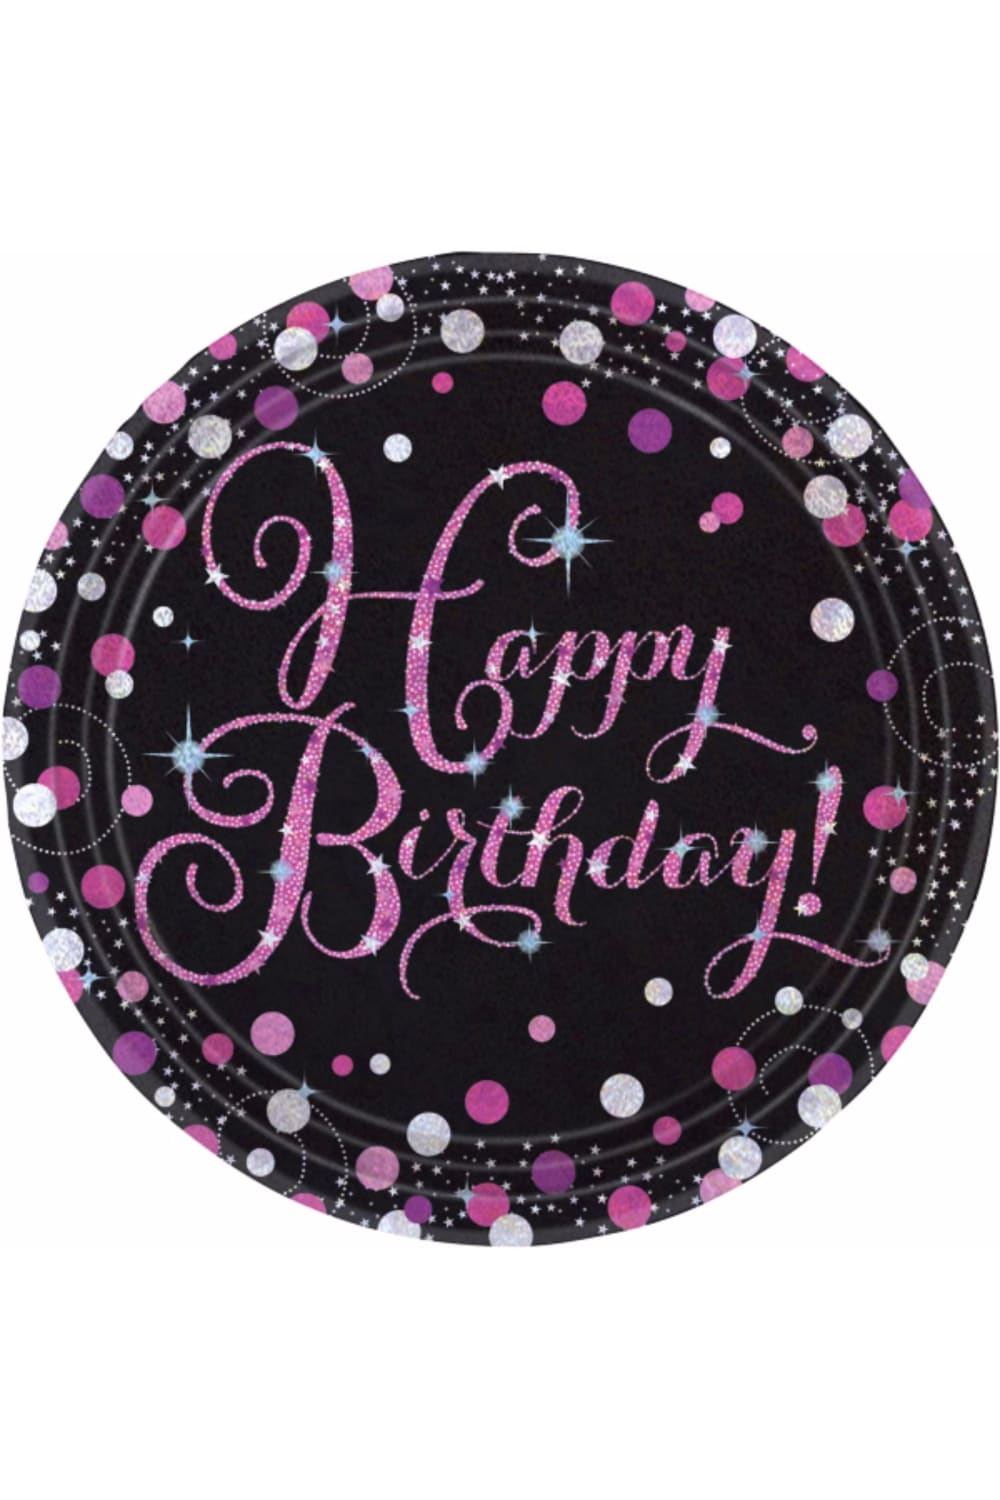 Amscan Sparkling Pink Celebration Happy Birthday Party Plates (Pack of 8) (Black/Pink) (One Size)